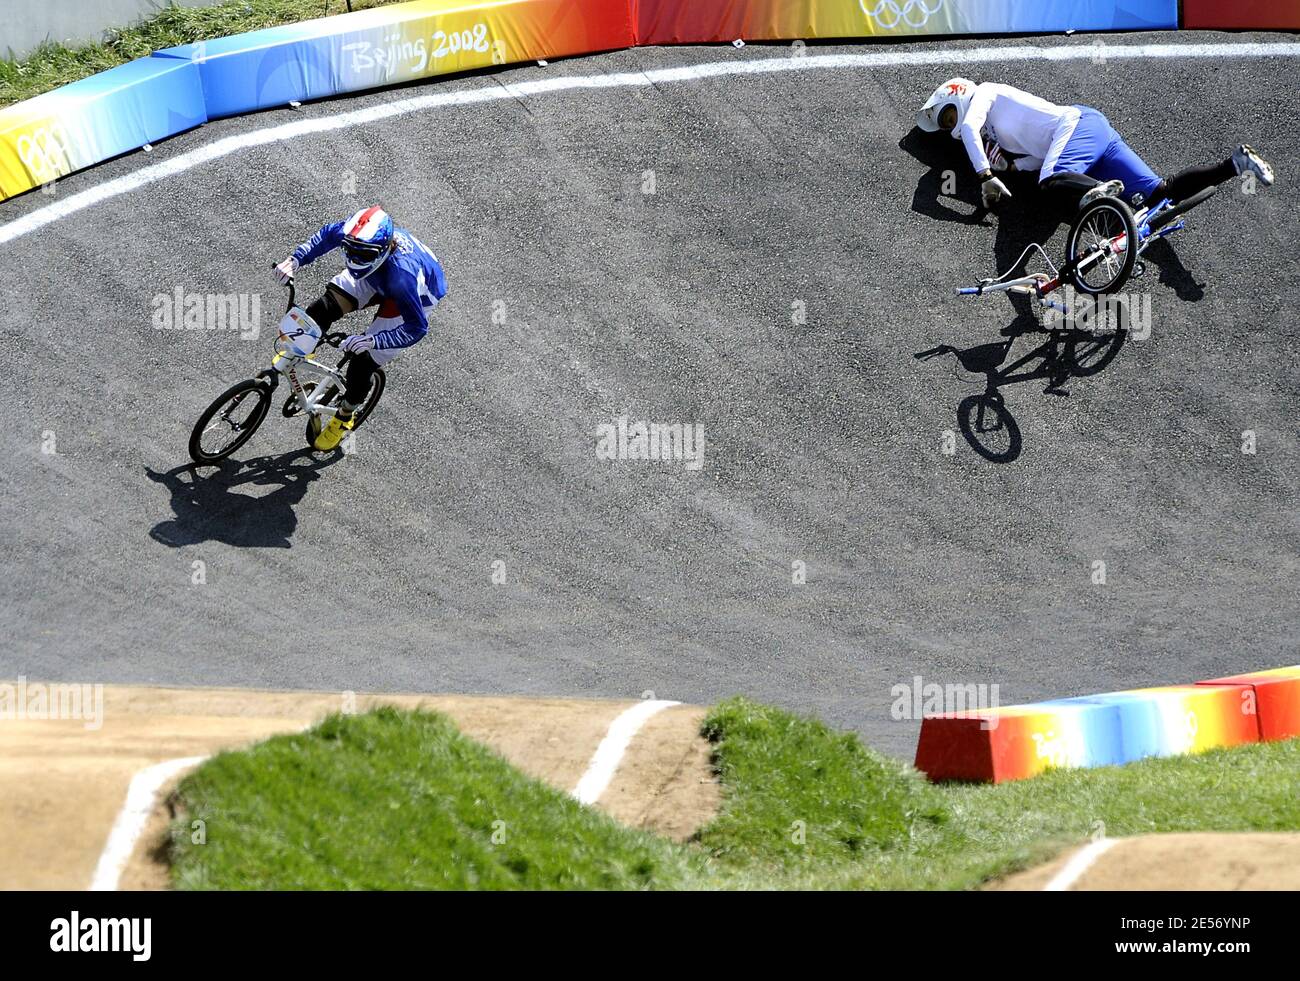 Great Britain's Shanaze Reade crashes as France's Anne-Caroline Chausson  races in the Women's BMX Final of the Beijing 2008 Olympic Games Day 14 at  the Laoshan Bicycle Moto Cross (BMX) Venue in